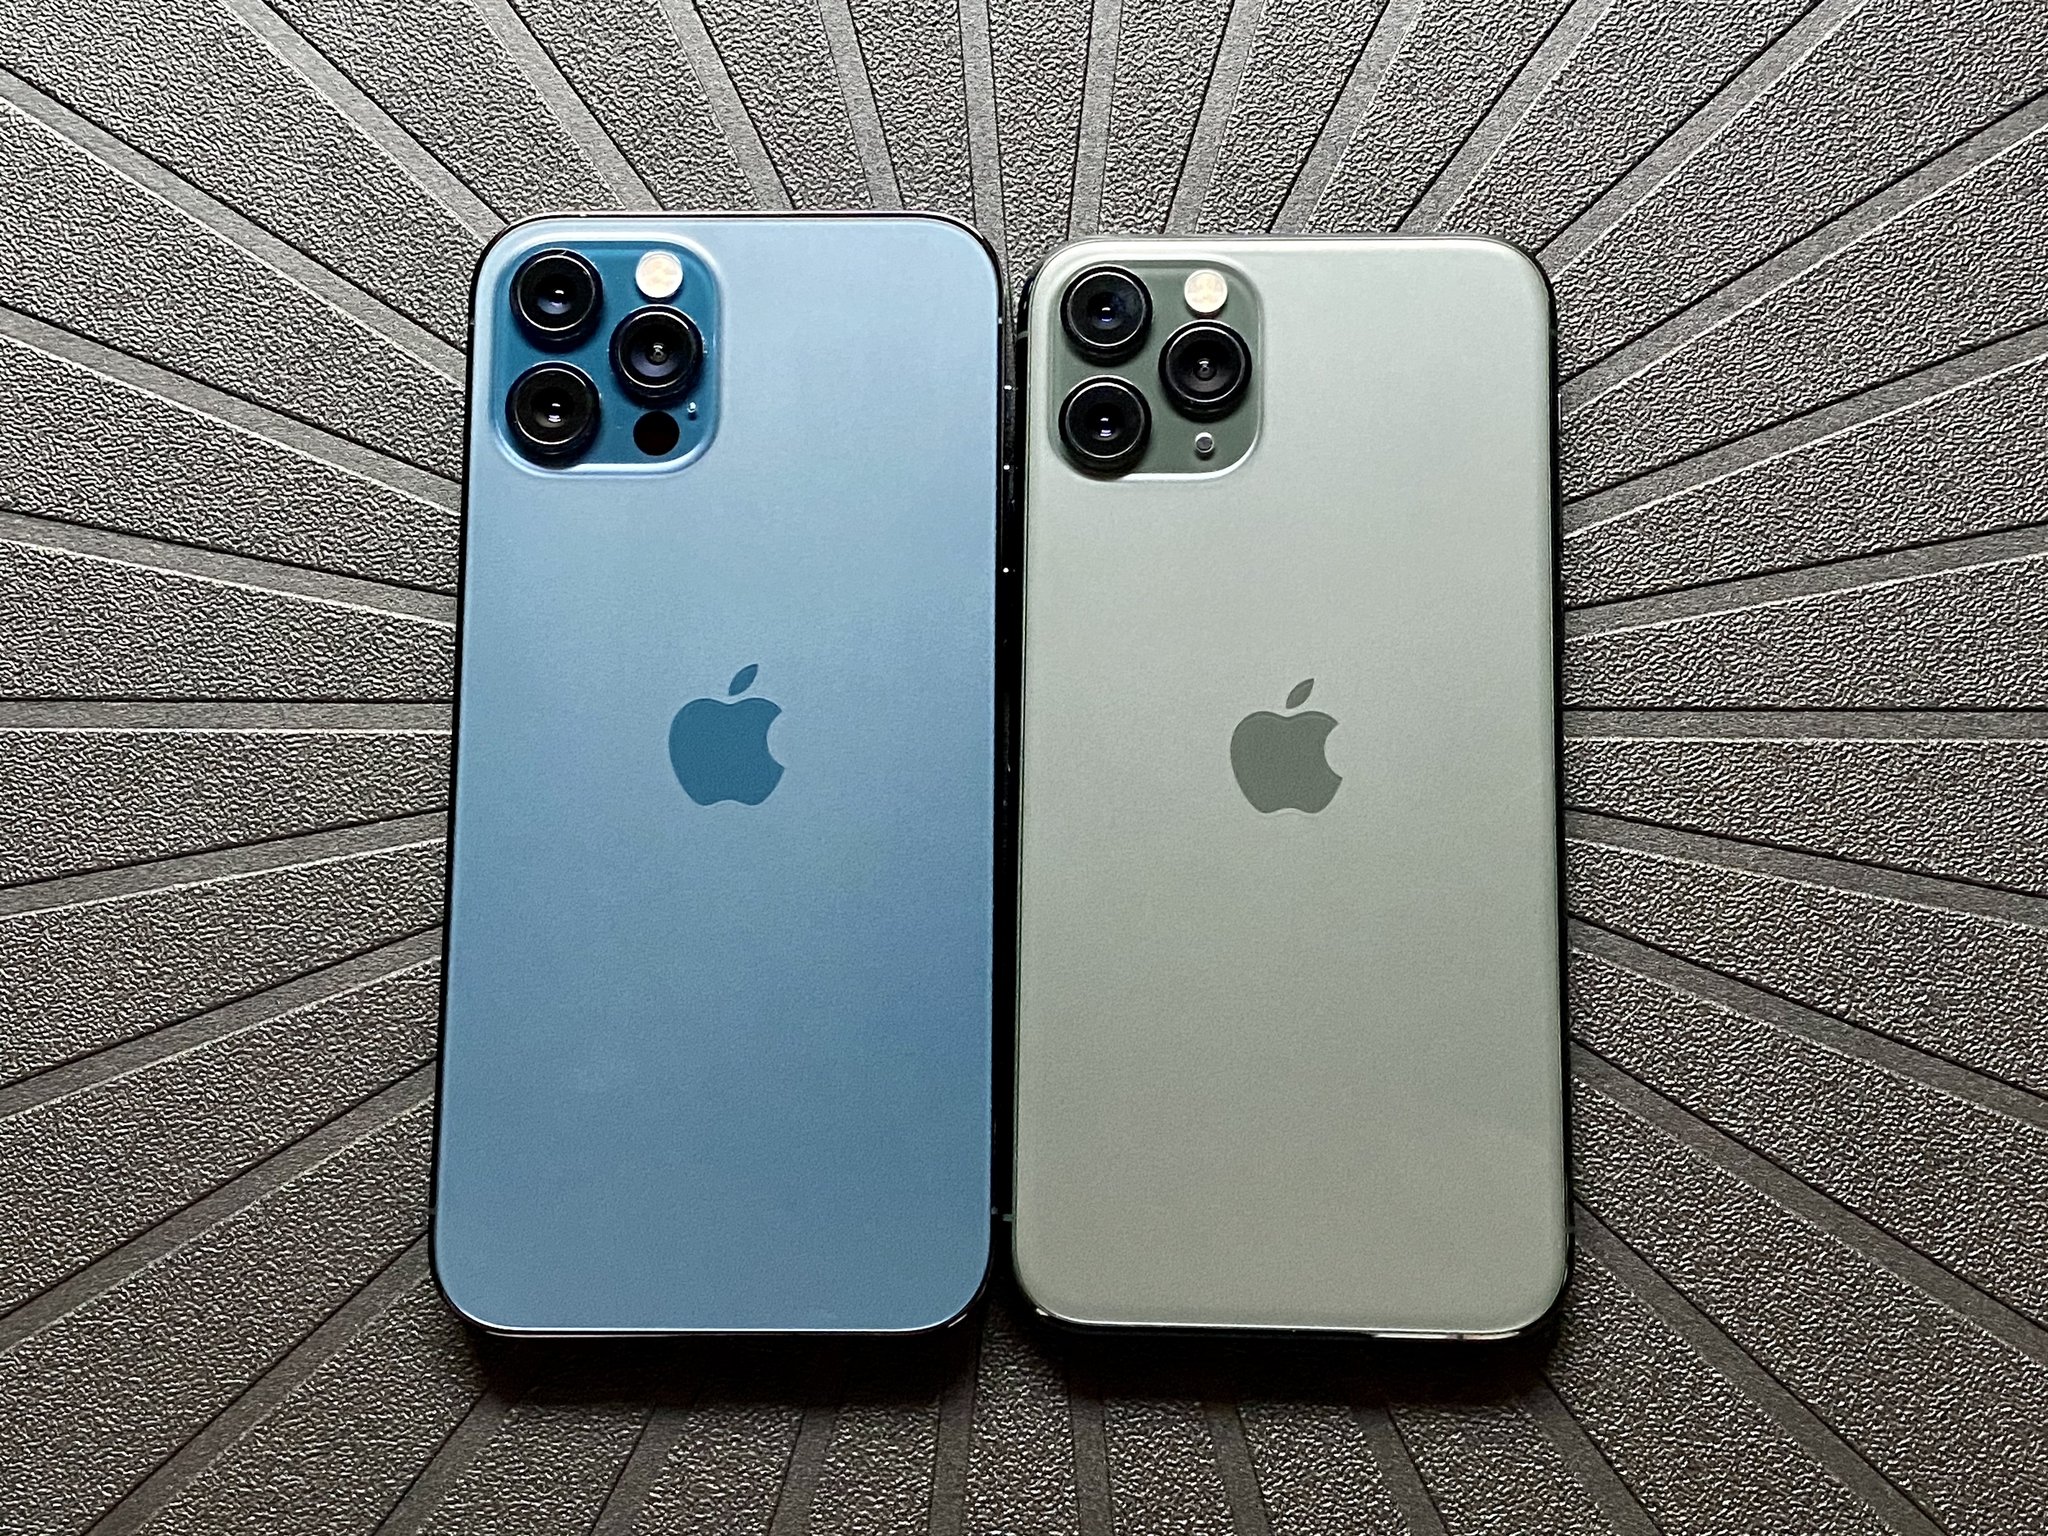 Iphone 12 Pro Pacific Blue Iphone 11 Midnight Green Side By Side Black